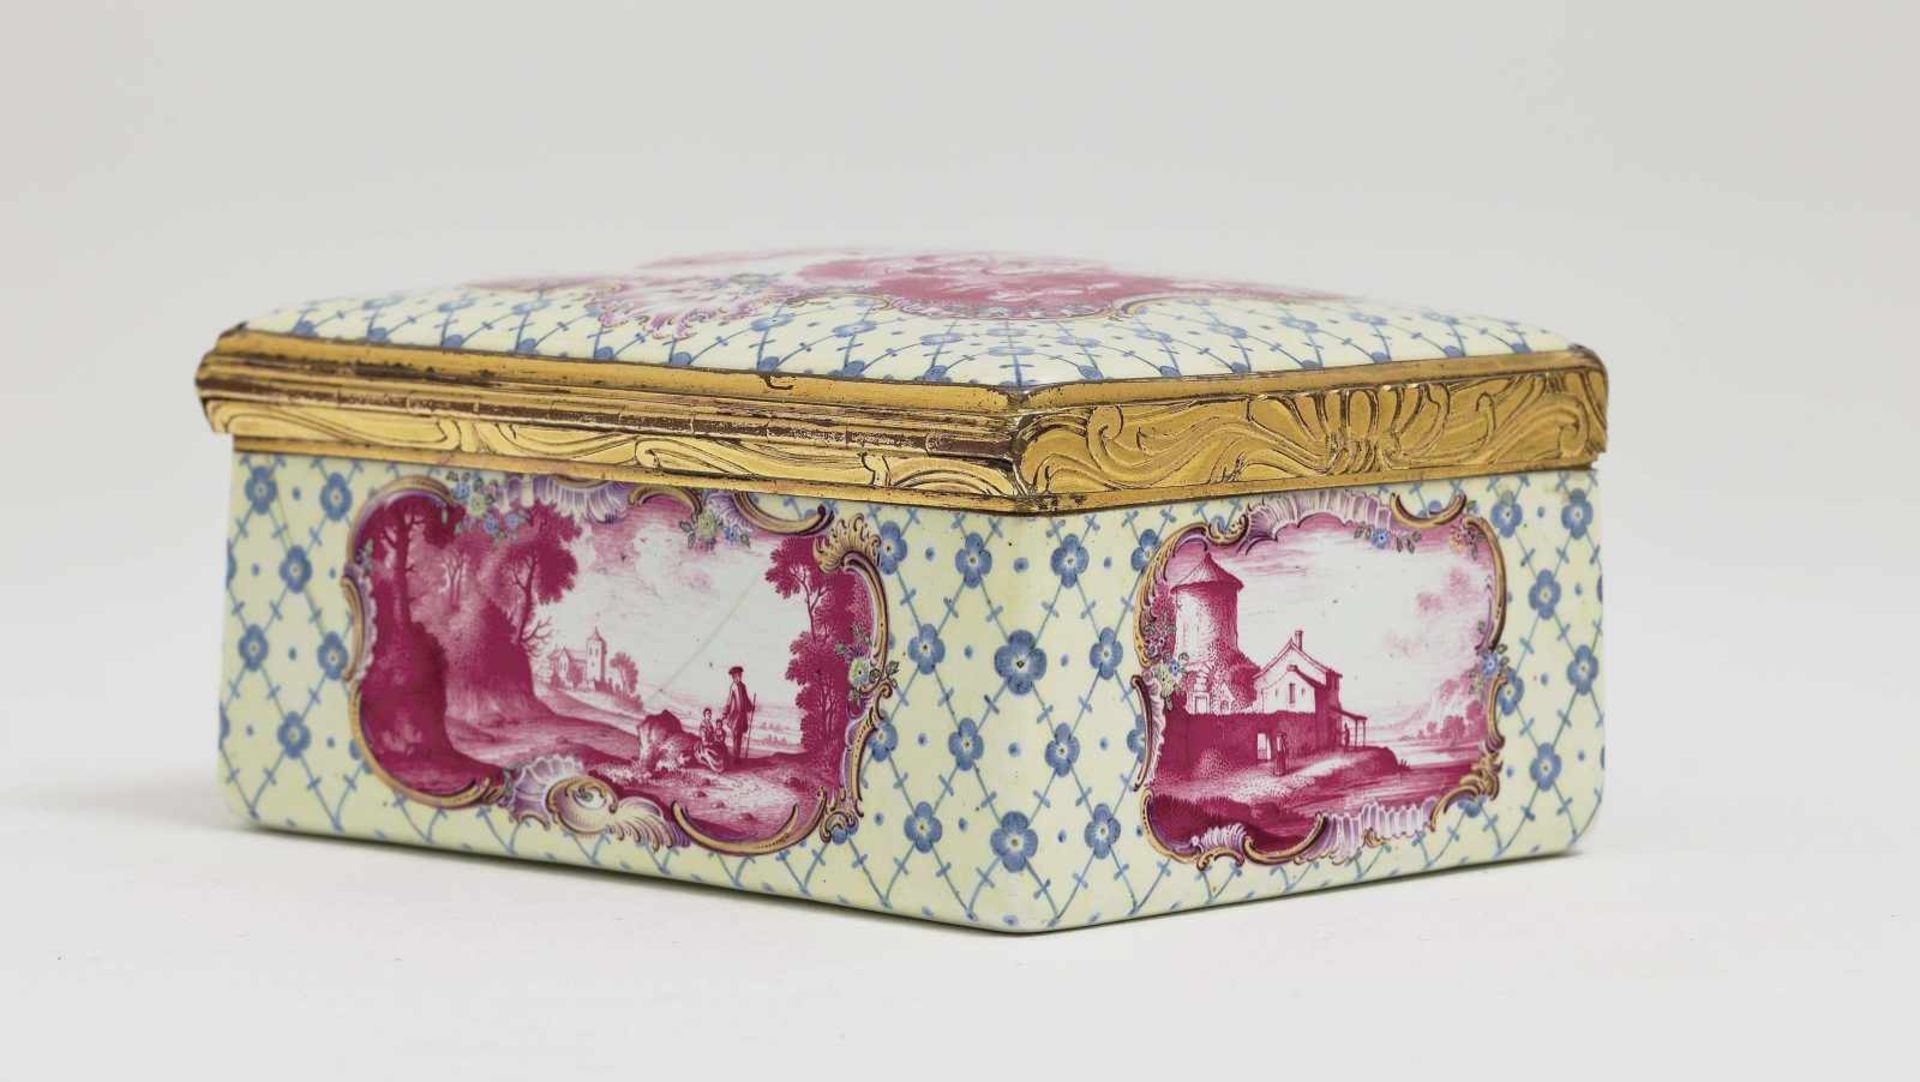 A Snuff BoxMid-18th Century Enamel on copper. Gold-plated copper mount. Rectangular with hinged lid. - Image 3 of 4